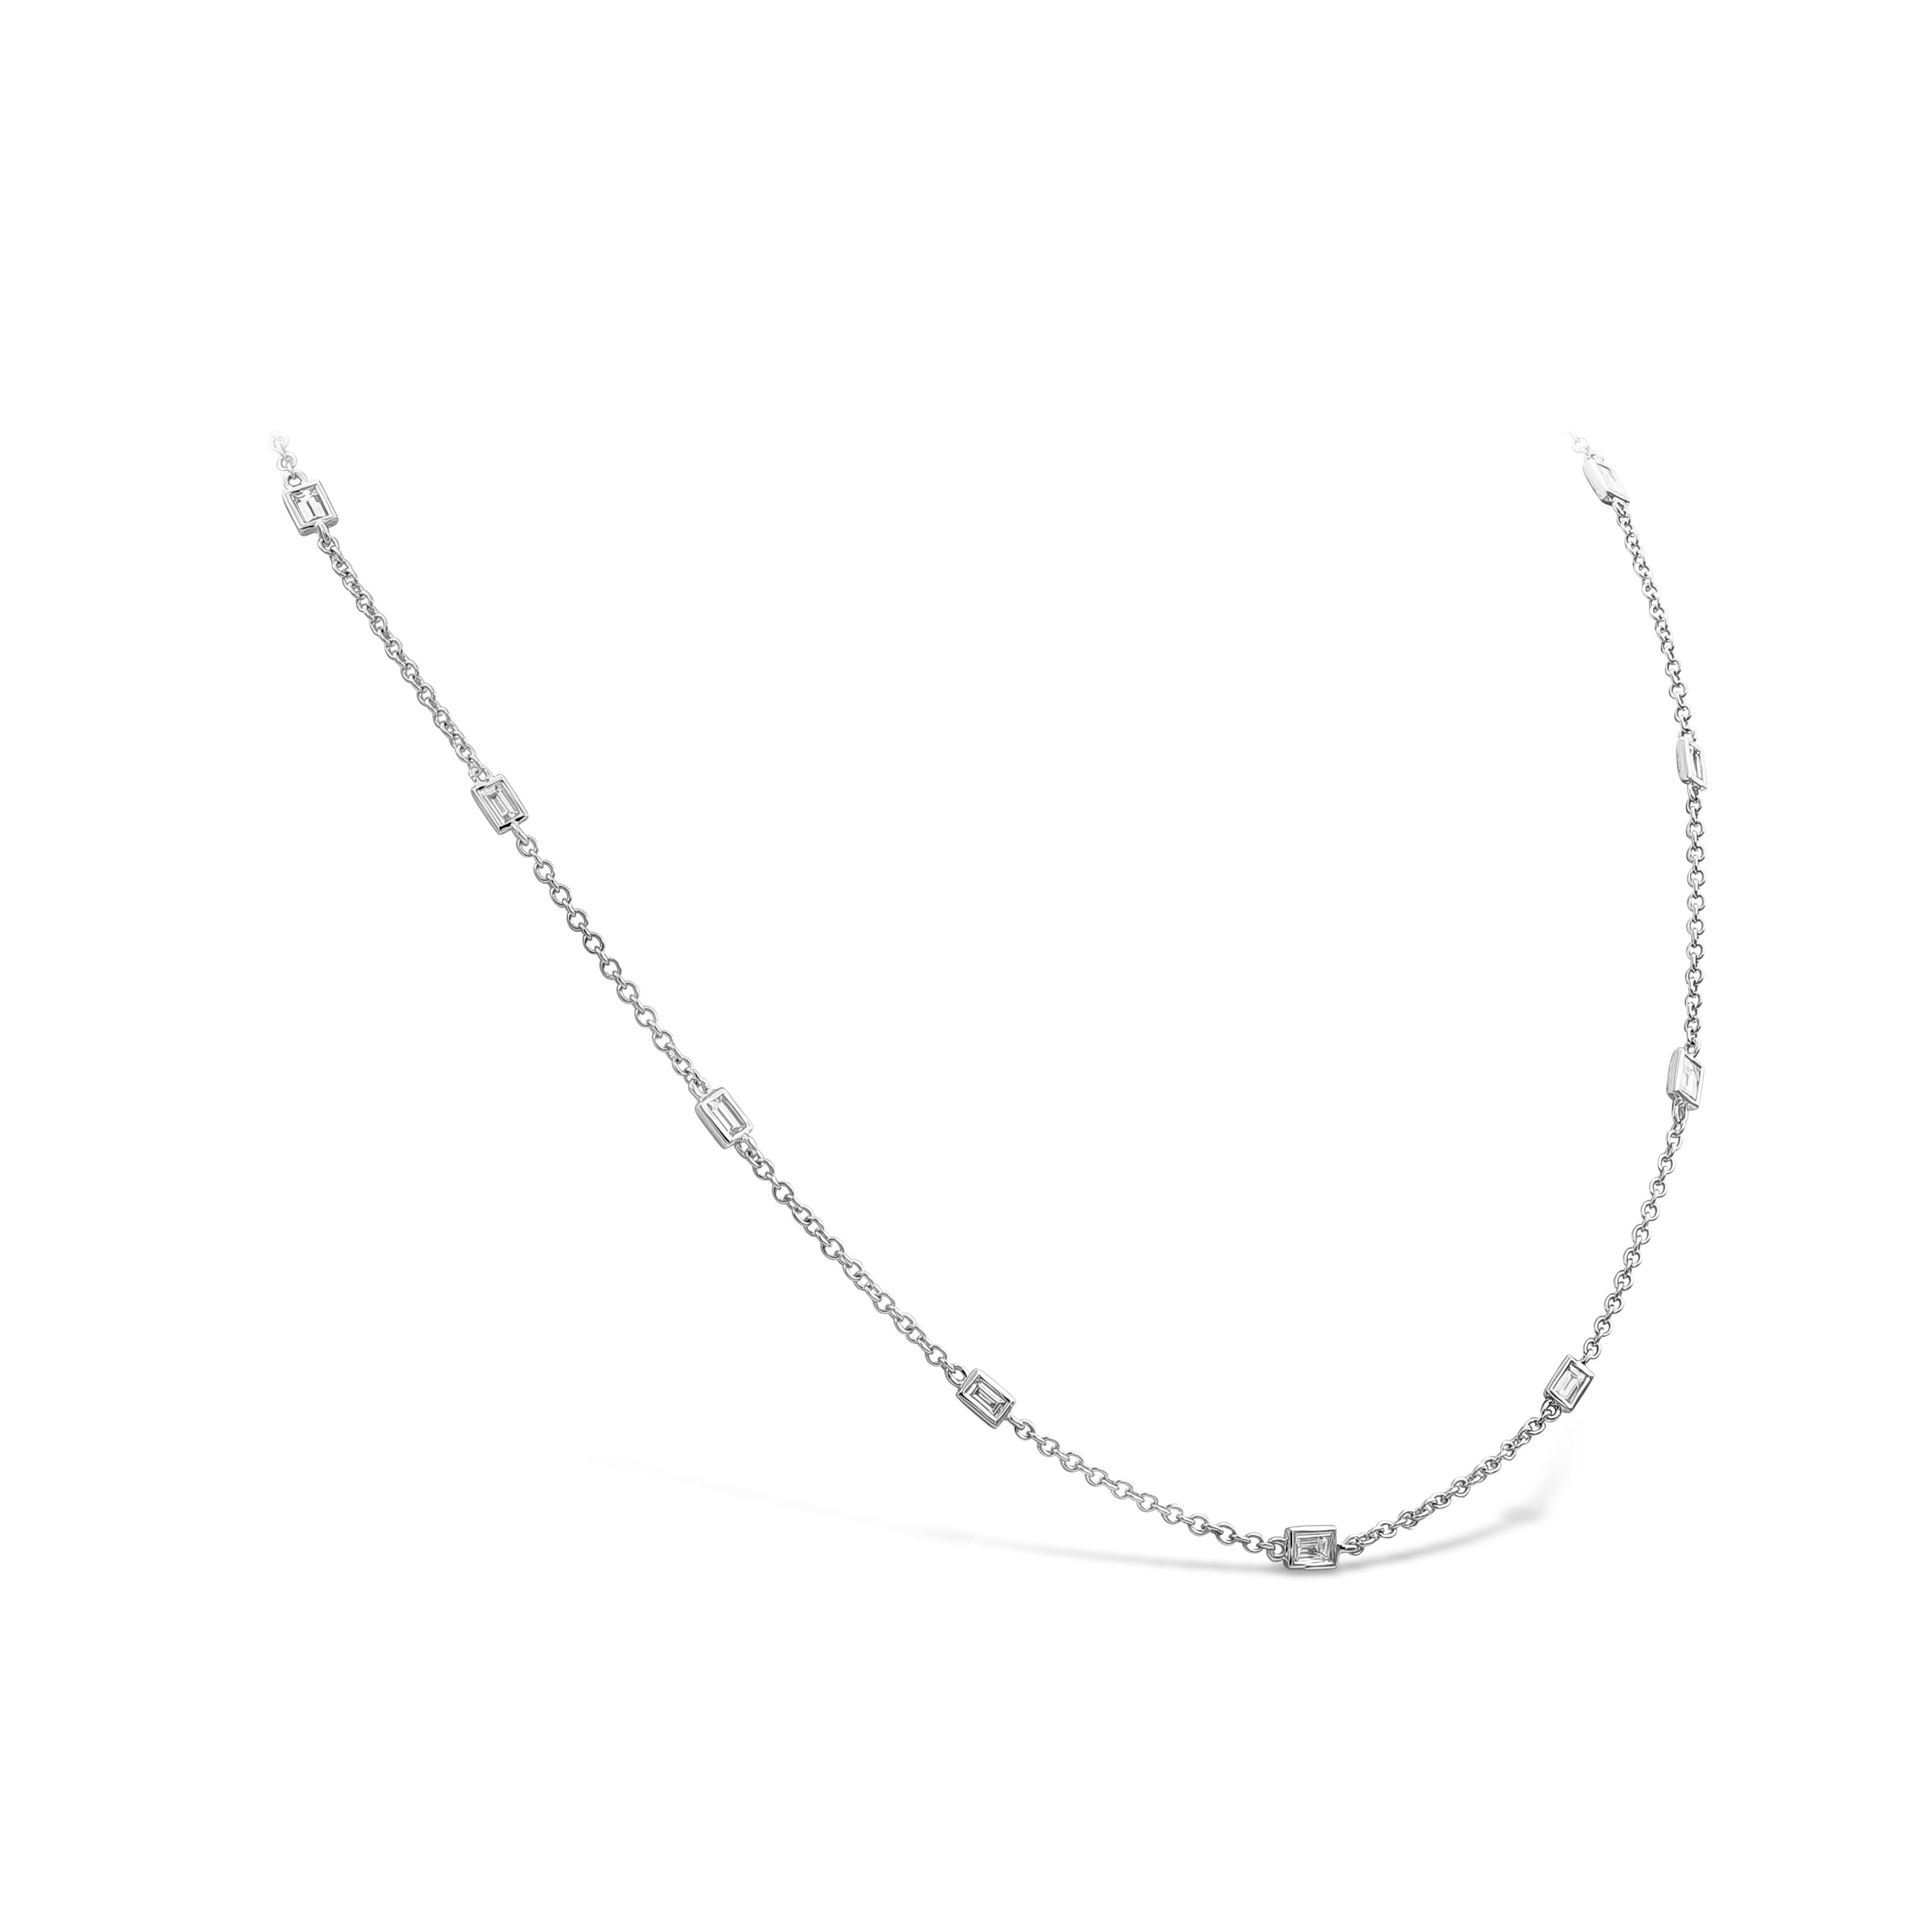 A beautiful and simple diamonds by the yard necklace showcasing baguette cut diamonds bezel set and spaced evenly with 18k white gold . Diamonds weigh 1.07 carats total F color and VS-VVS in clarity.

Roman Malakov is a custom house, specializing in